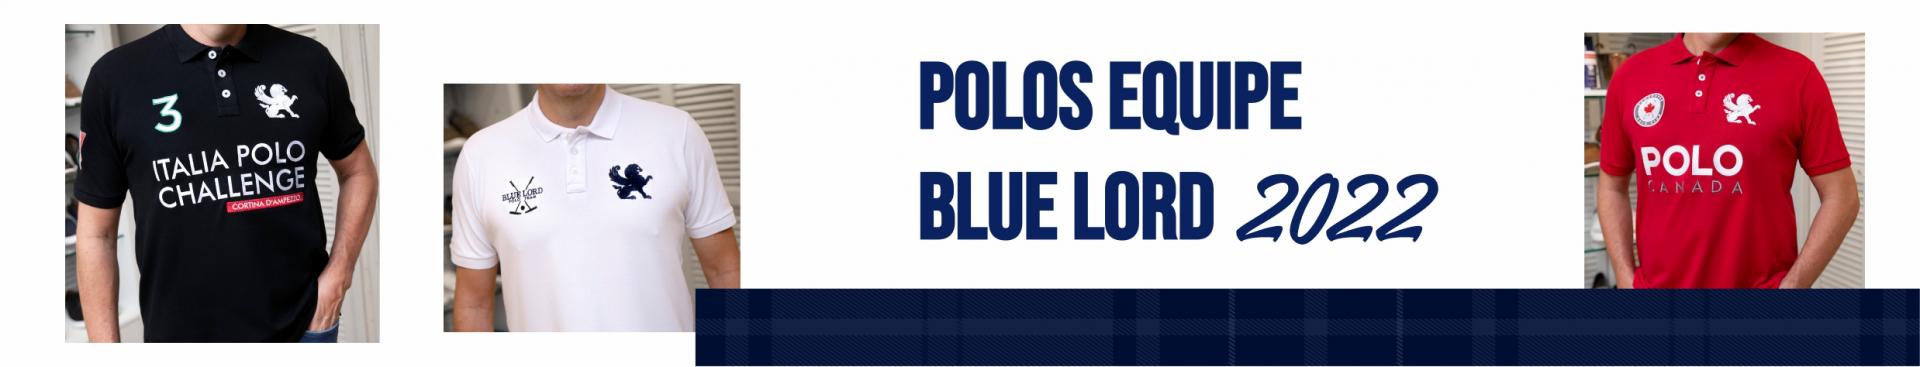 Banner Blue Lord polos equipe